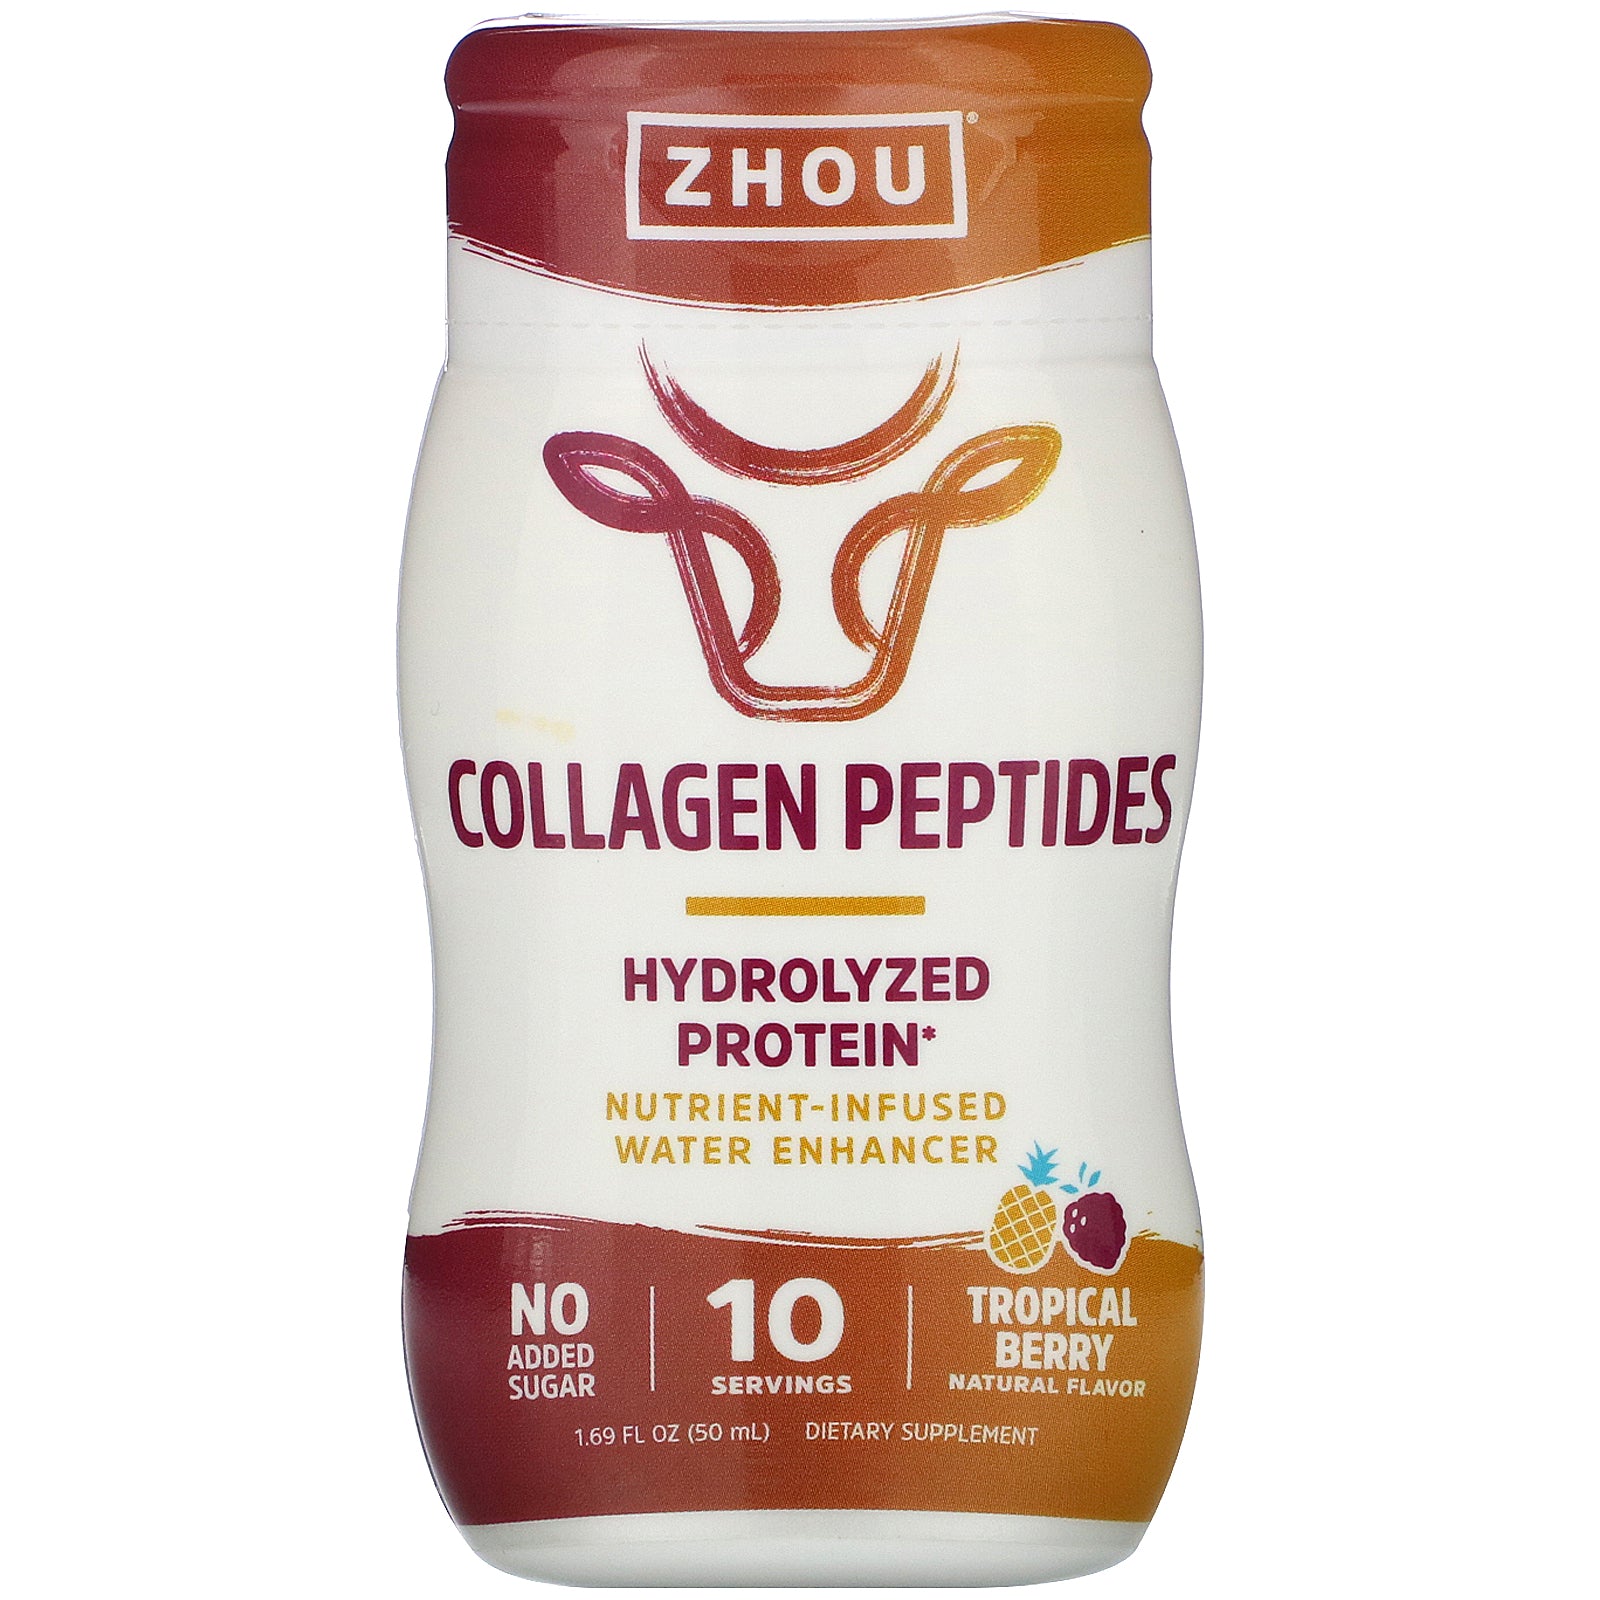 Zhou Nutrition, Collagen Peptides, Nutrient-Infused Water Enhancer, Tropical Berry, 1.69 fl oz (50 ml)